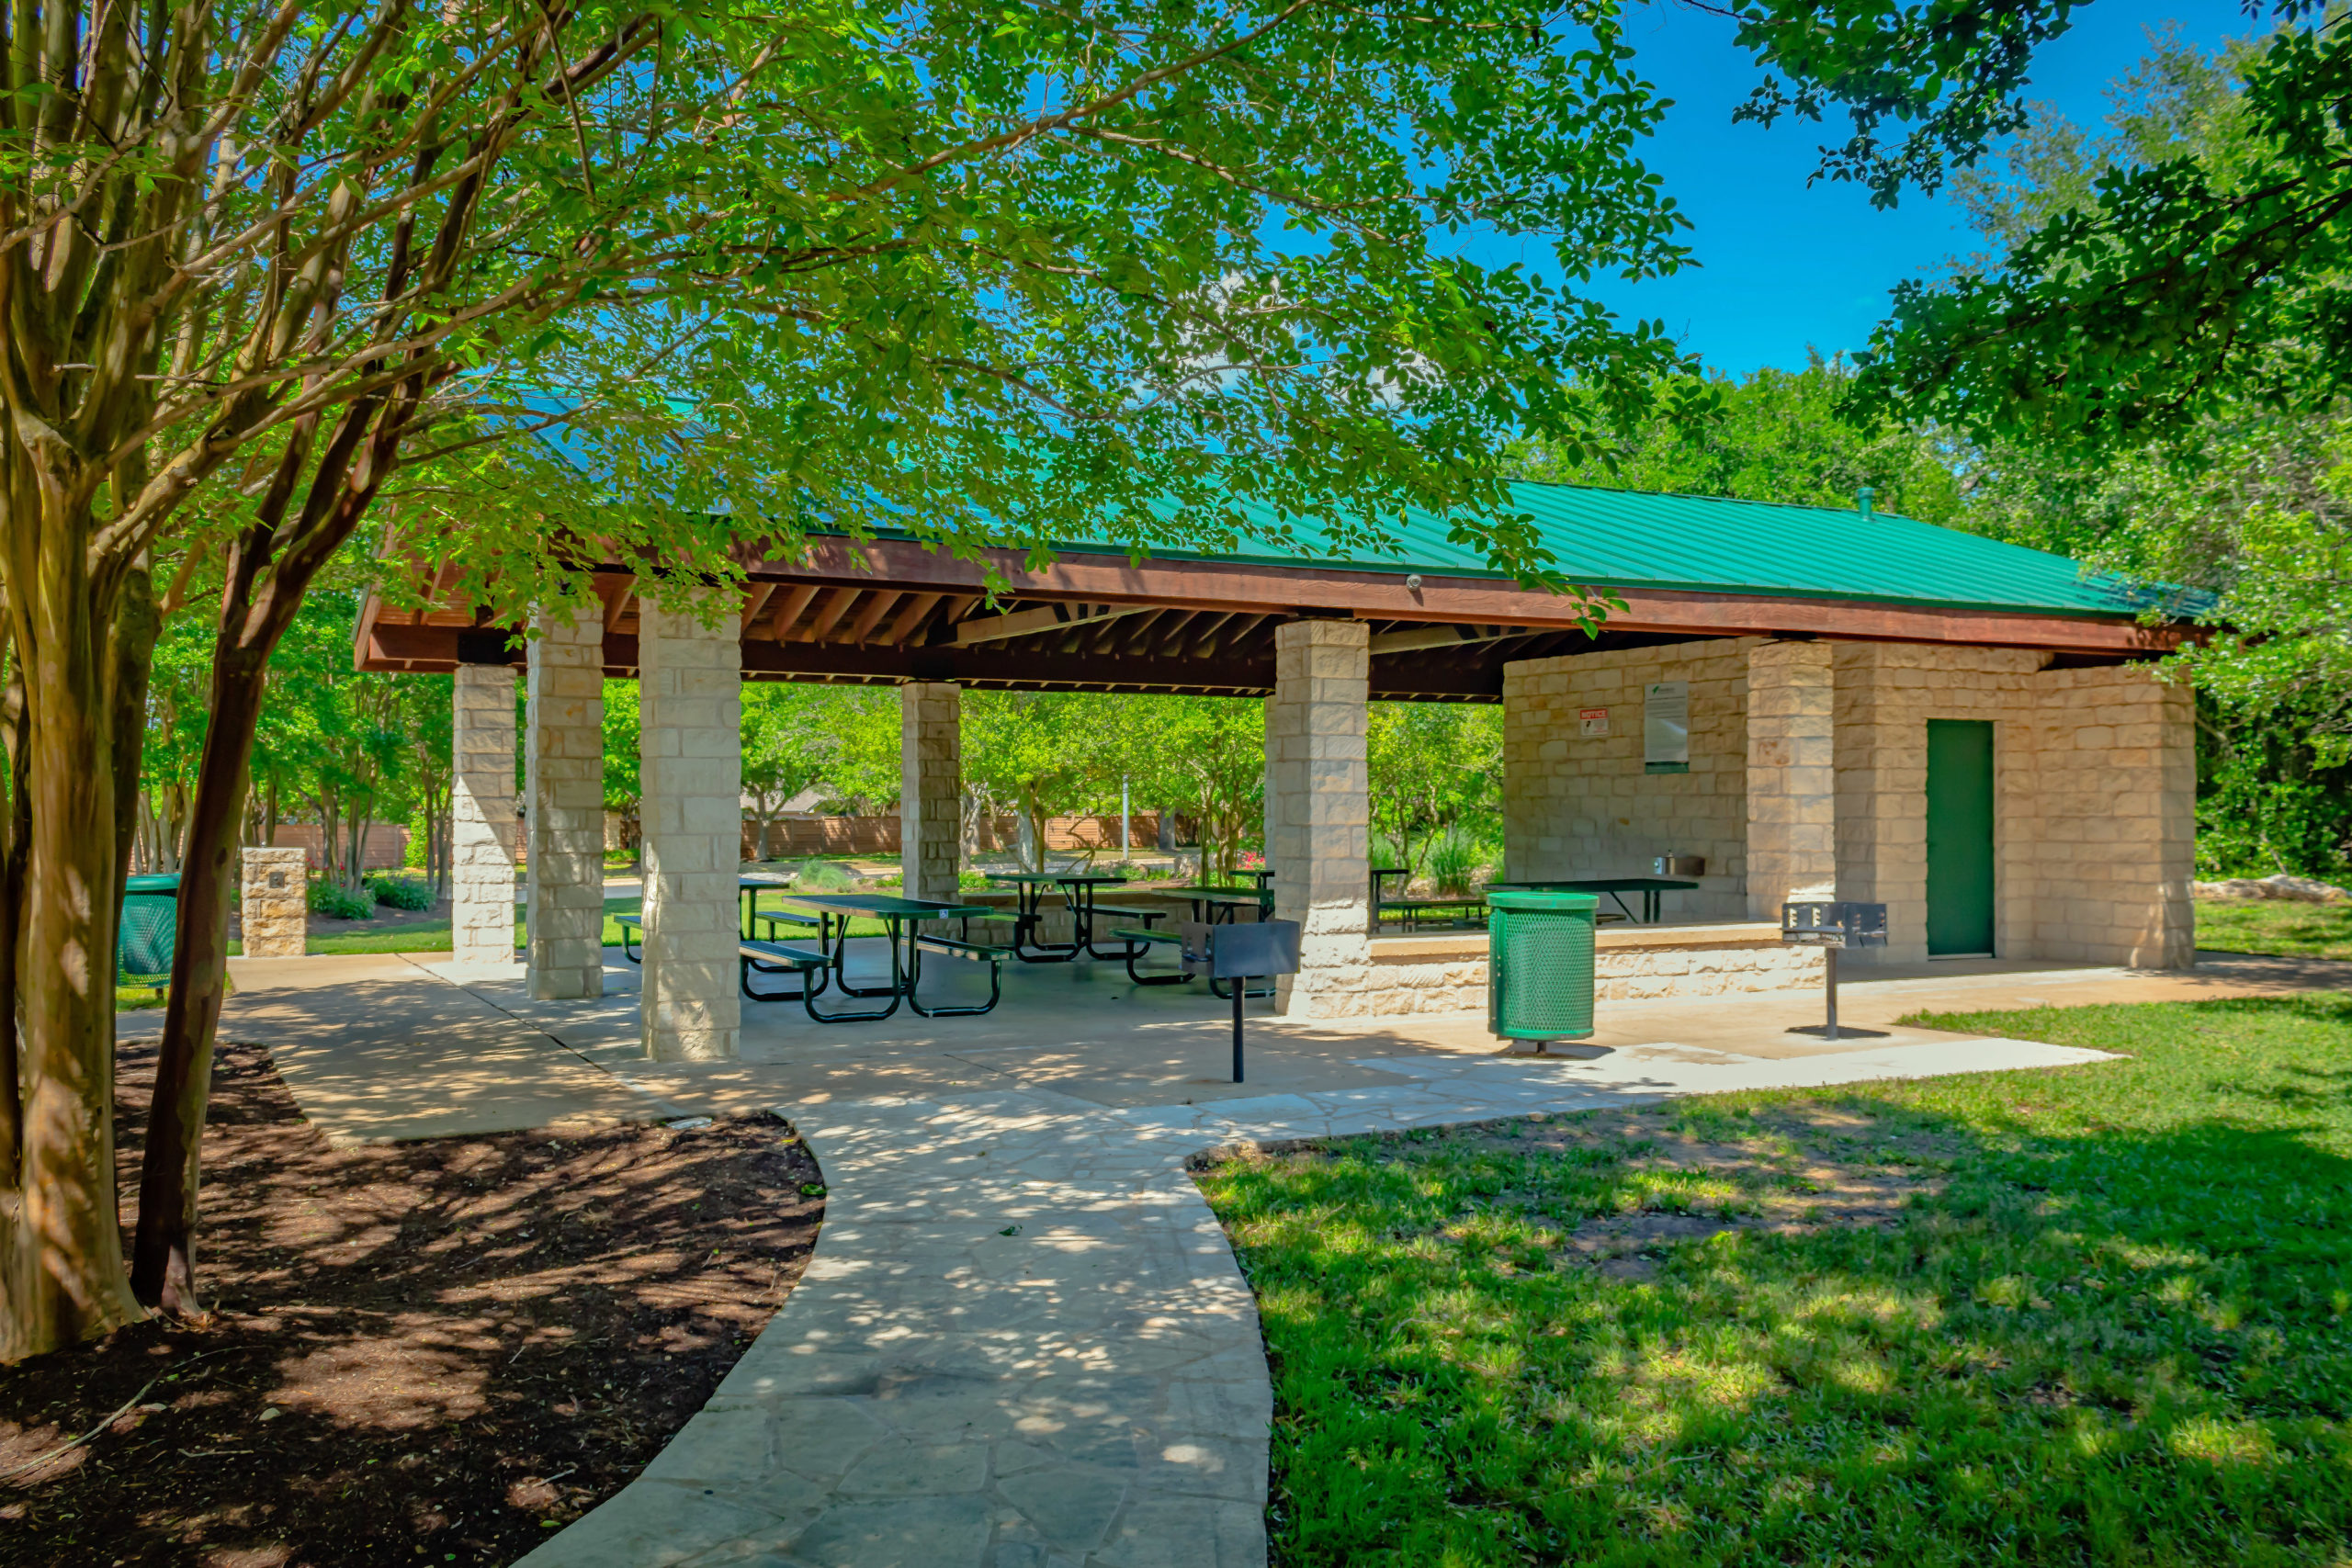 Picture of the covered pavilion and tables, surrounded by trees.